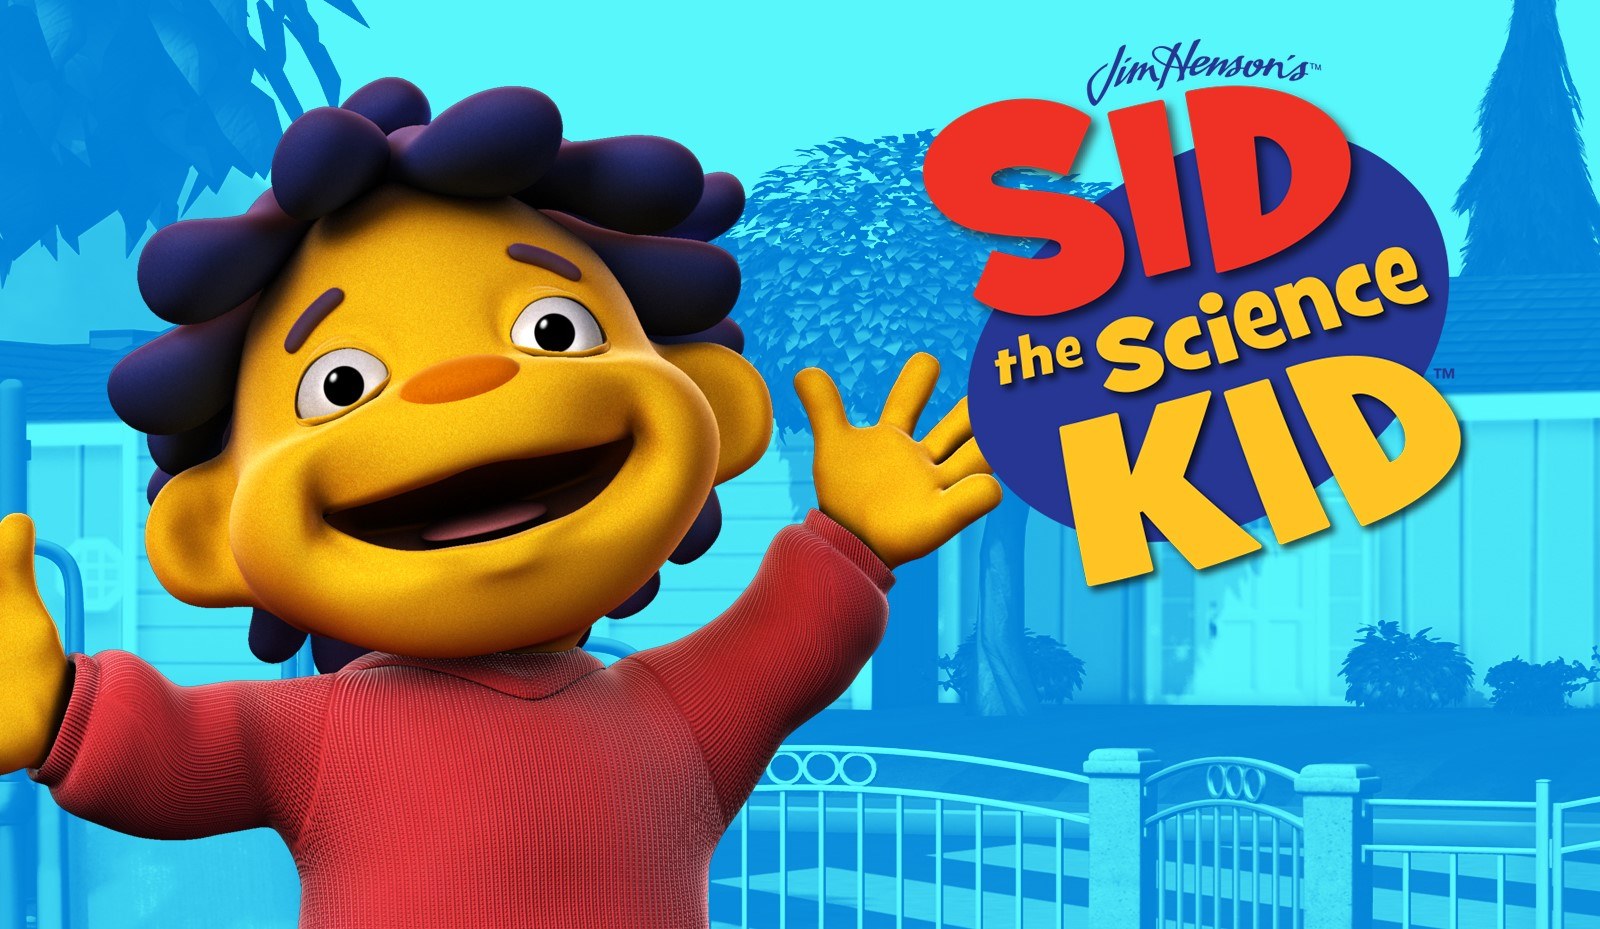 13 Facts About Sid The Science Kid (Sid The Science Kid) - Facts.net